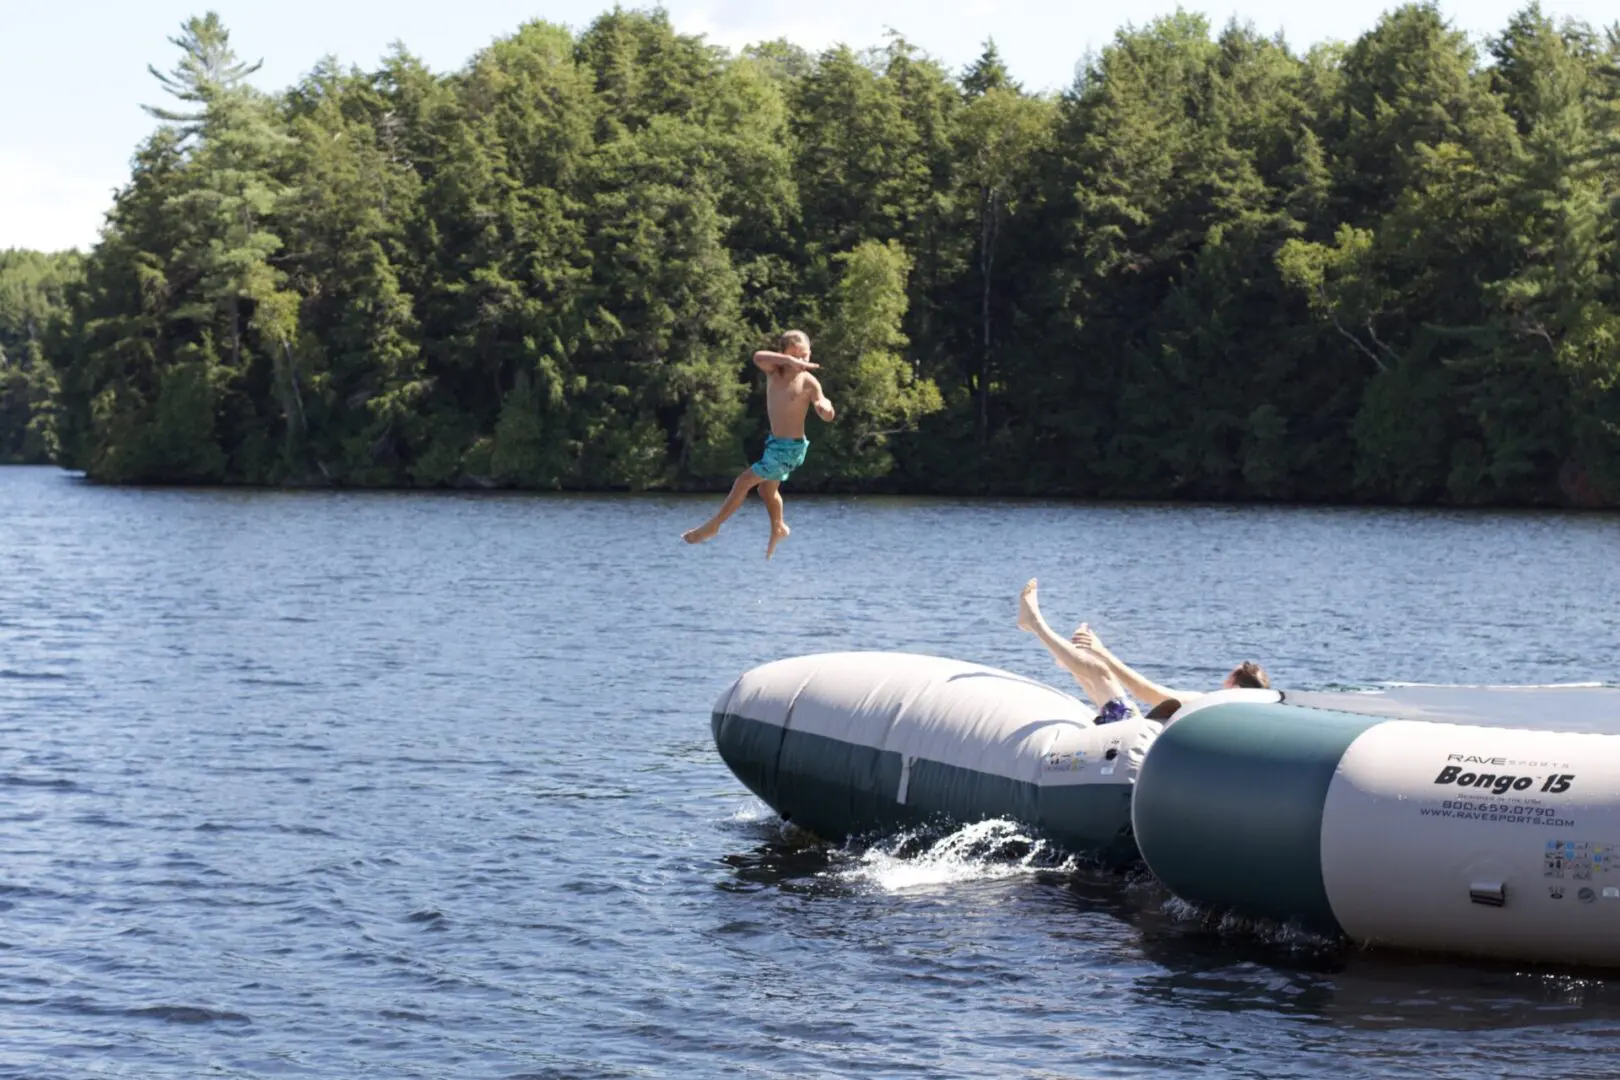 A person jumping off of an inflatable raft into the water.